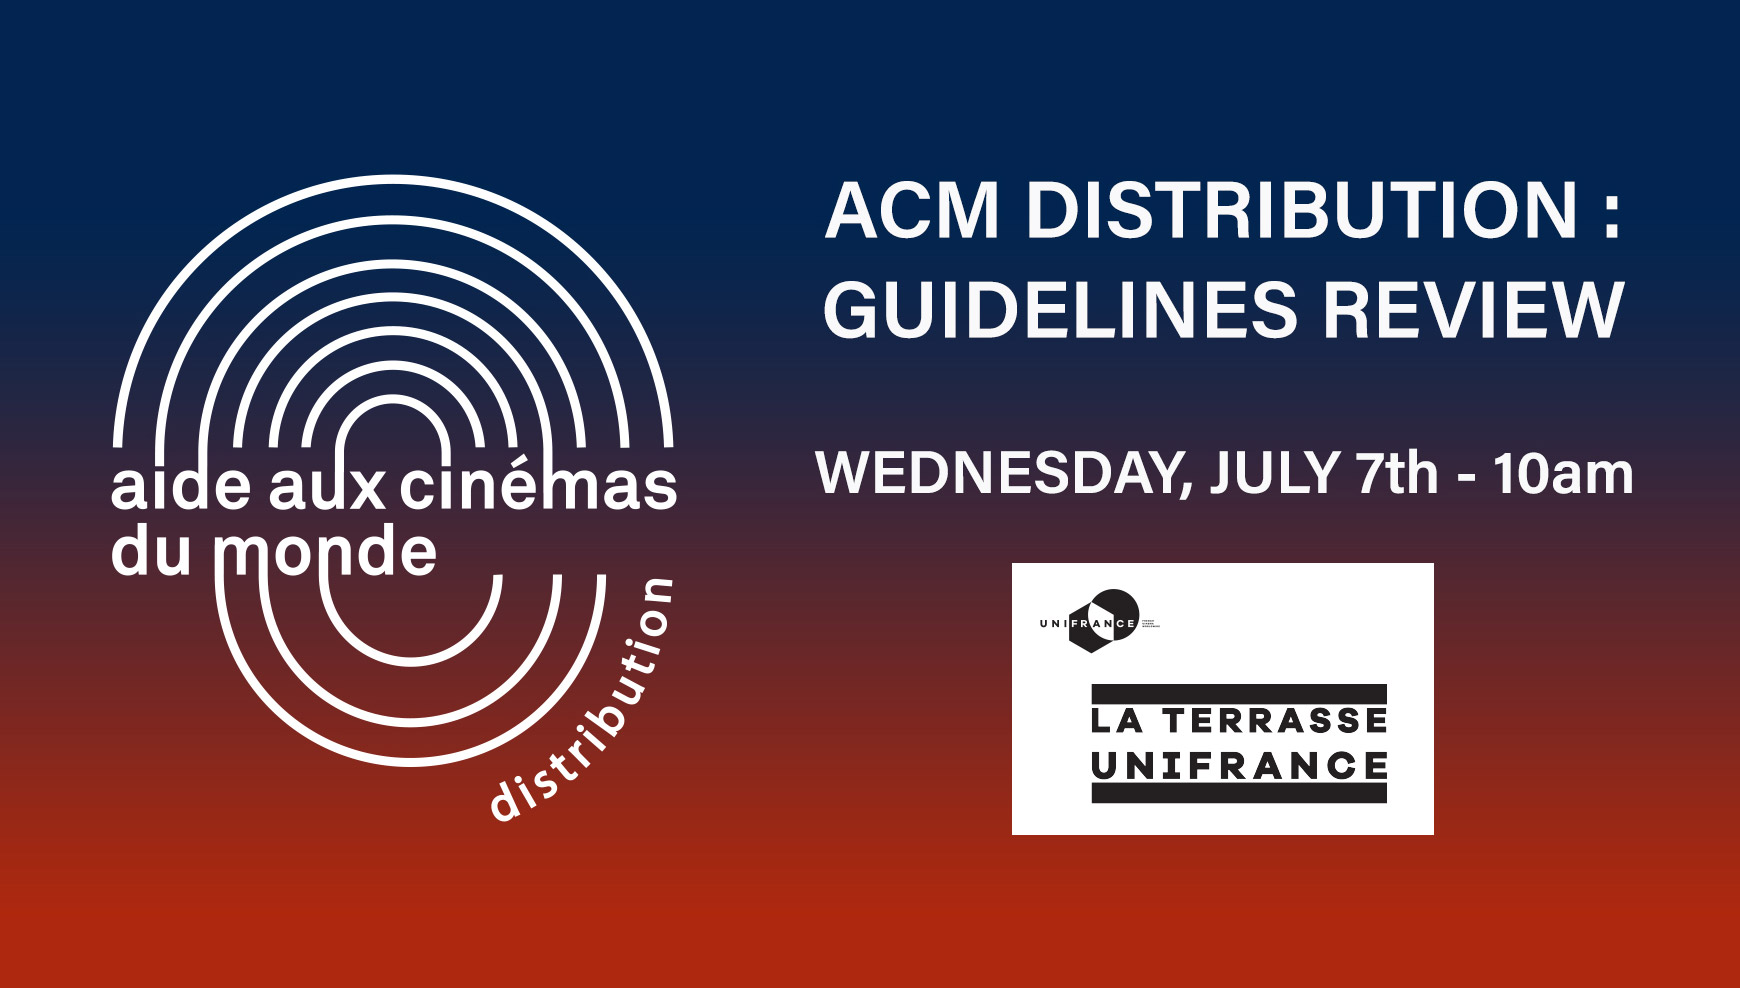 ACM Distribution - guidelines review Cannes